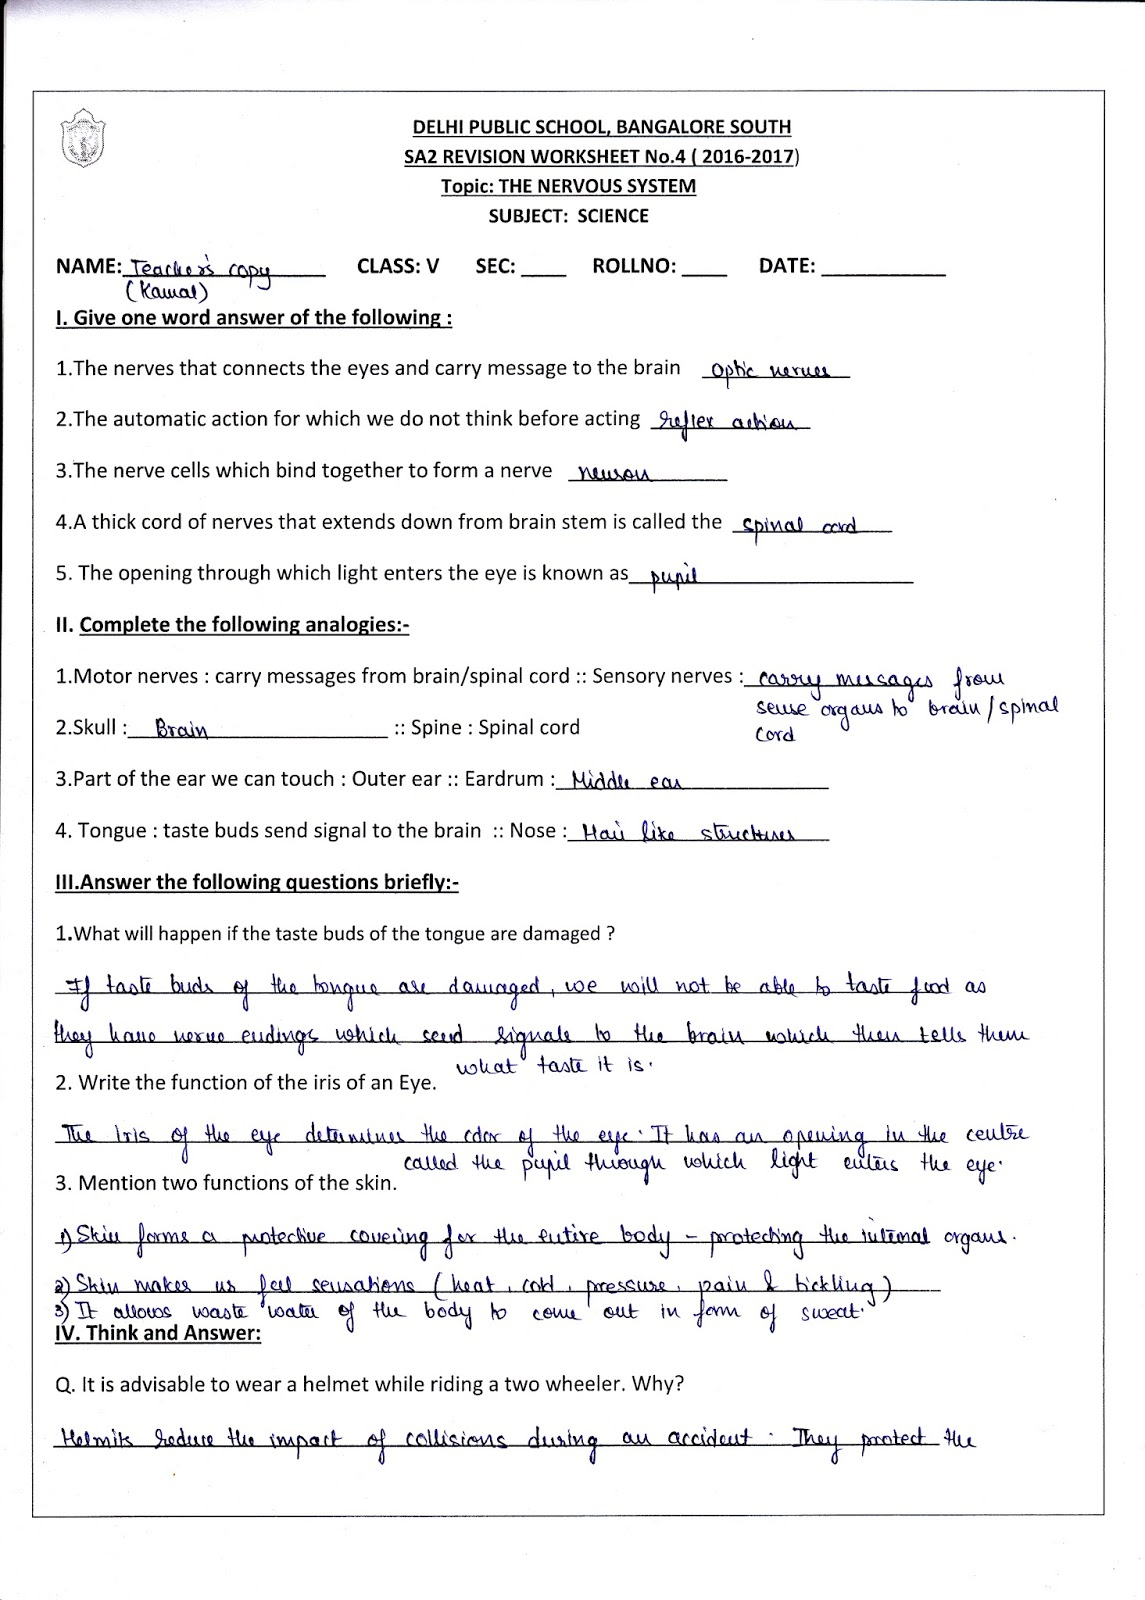 Science DPSkamal Grade 5 Answer Key Of All Revision Worksheets